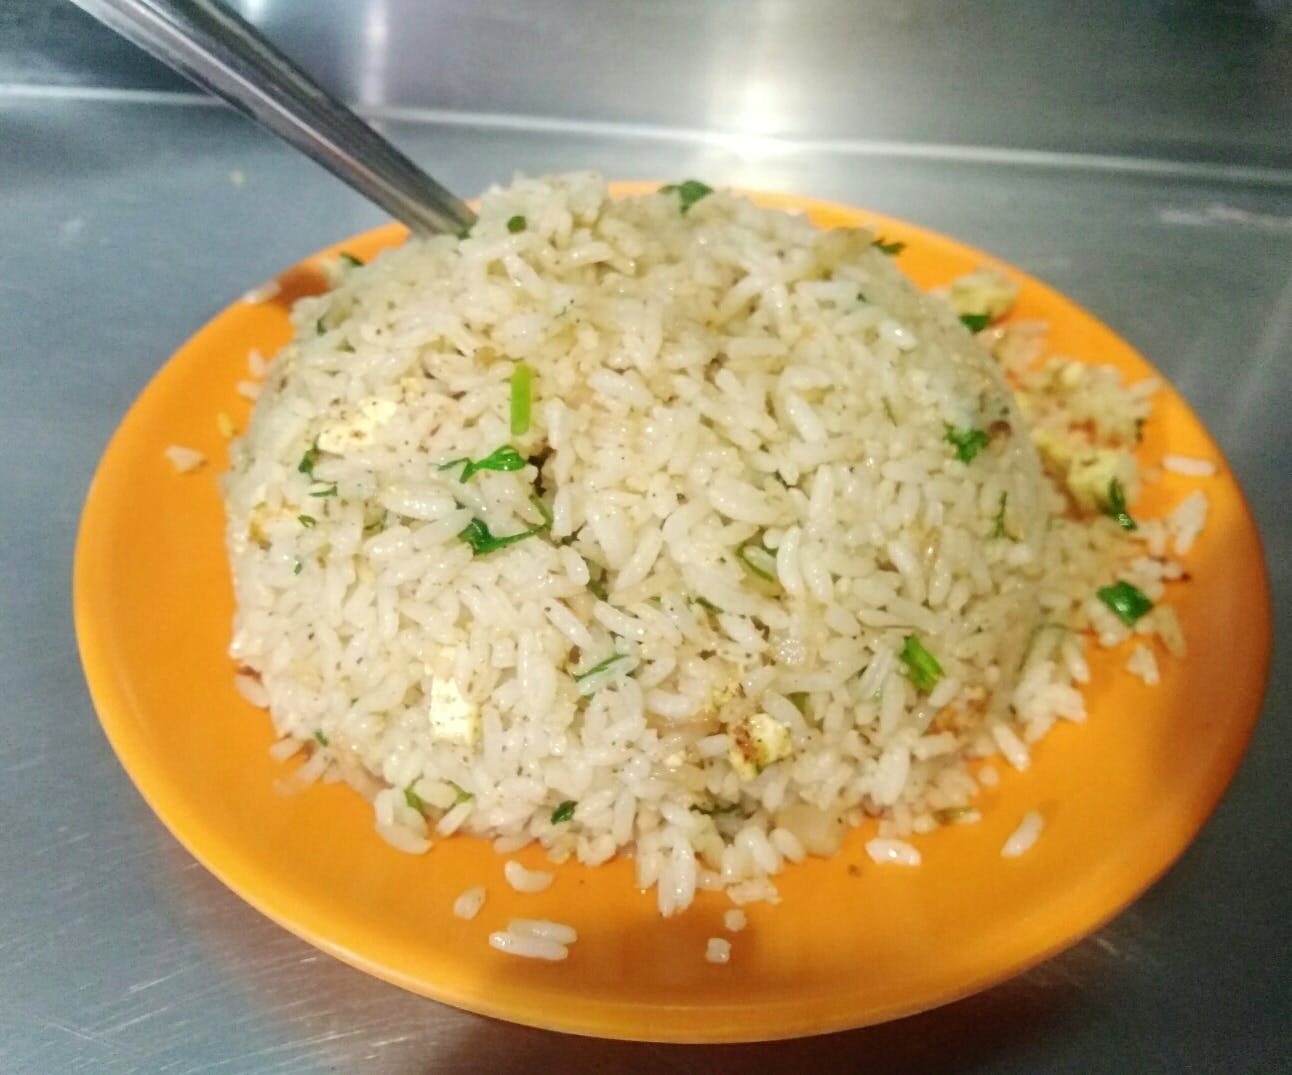 Cuisine,Spiced rice,Food,Dish,White rice,Steamed rice,Rice,Jasmine rice,Ingredient,Thai fried rice